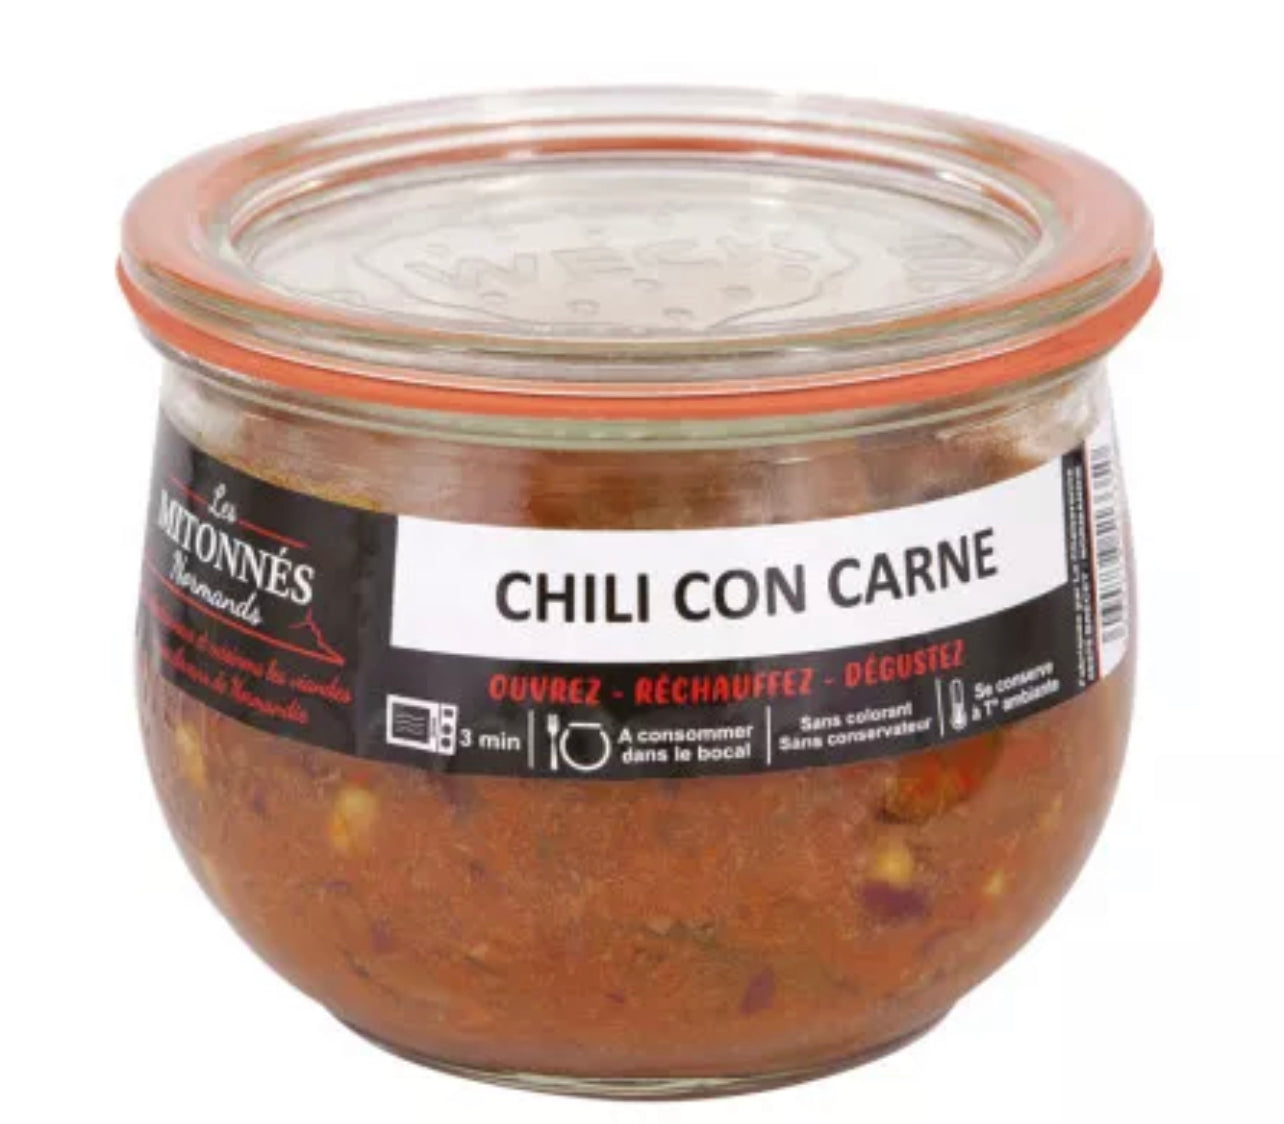 Normandy beef chili con carne - 375g